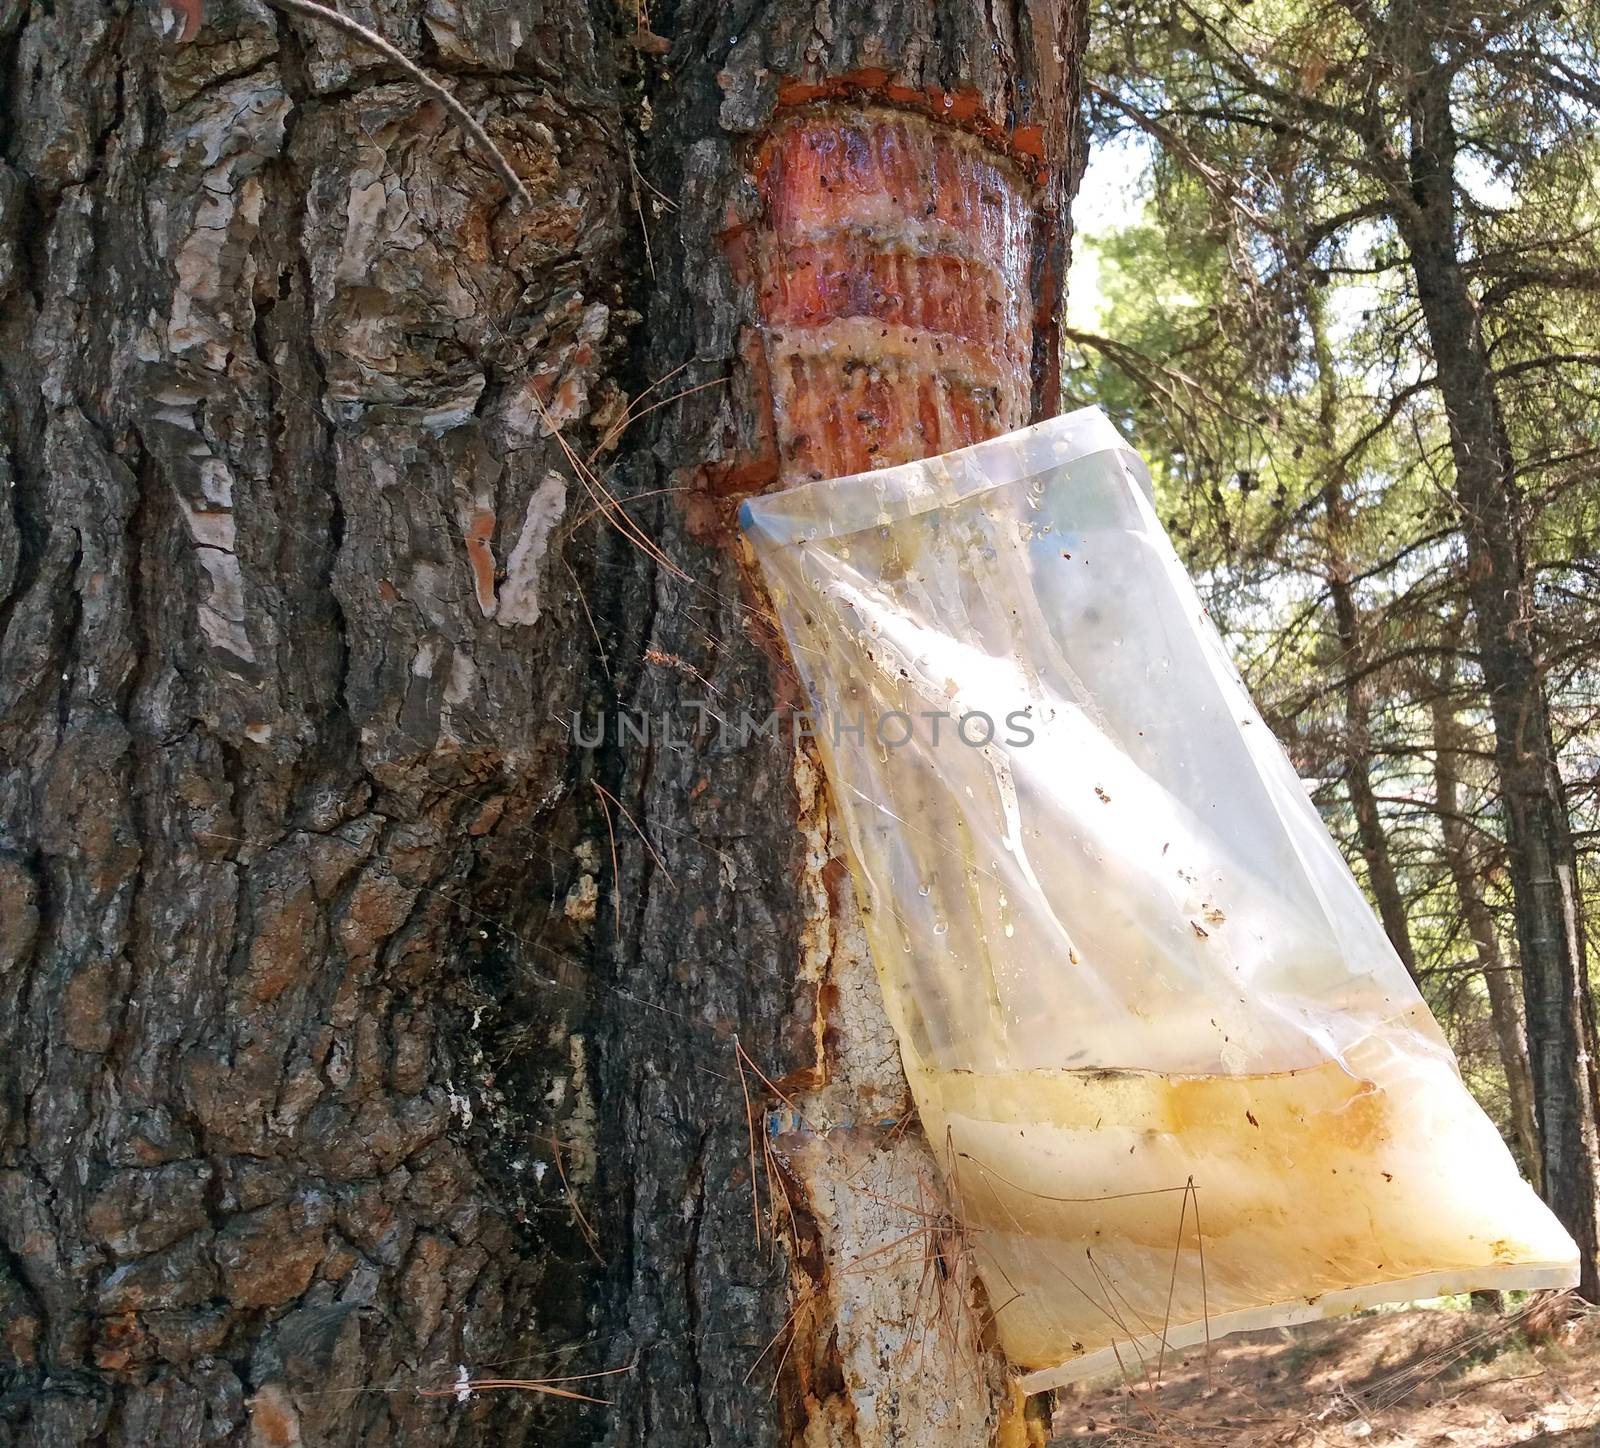 Extracting pine juice from the bark in Greece by Mindru